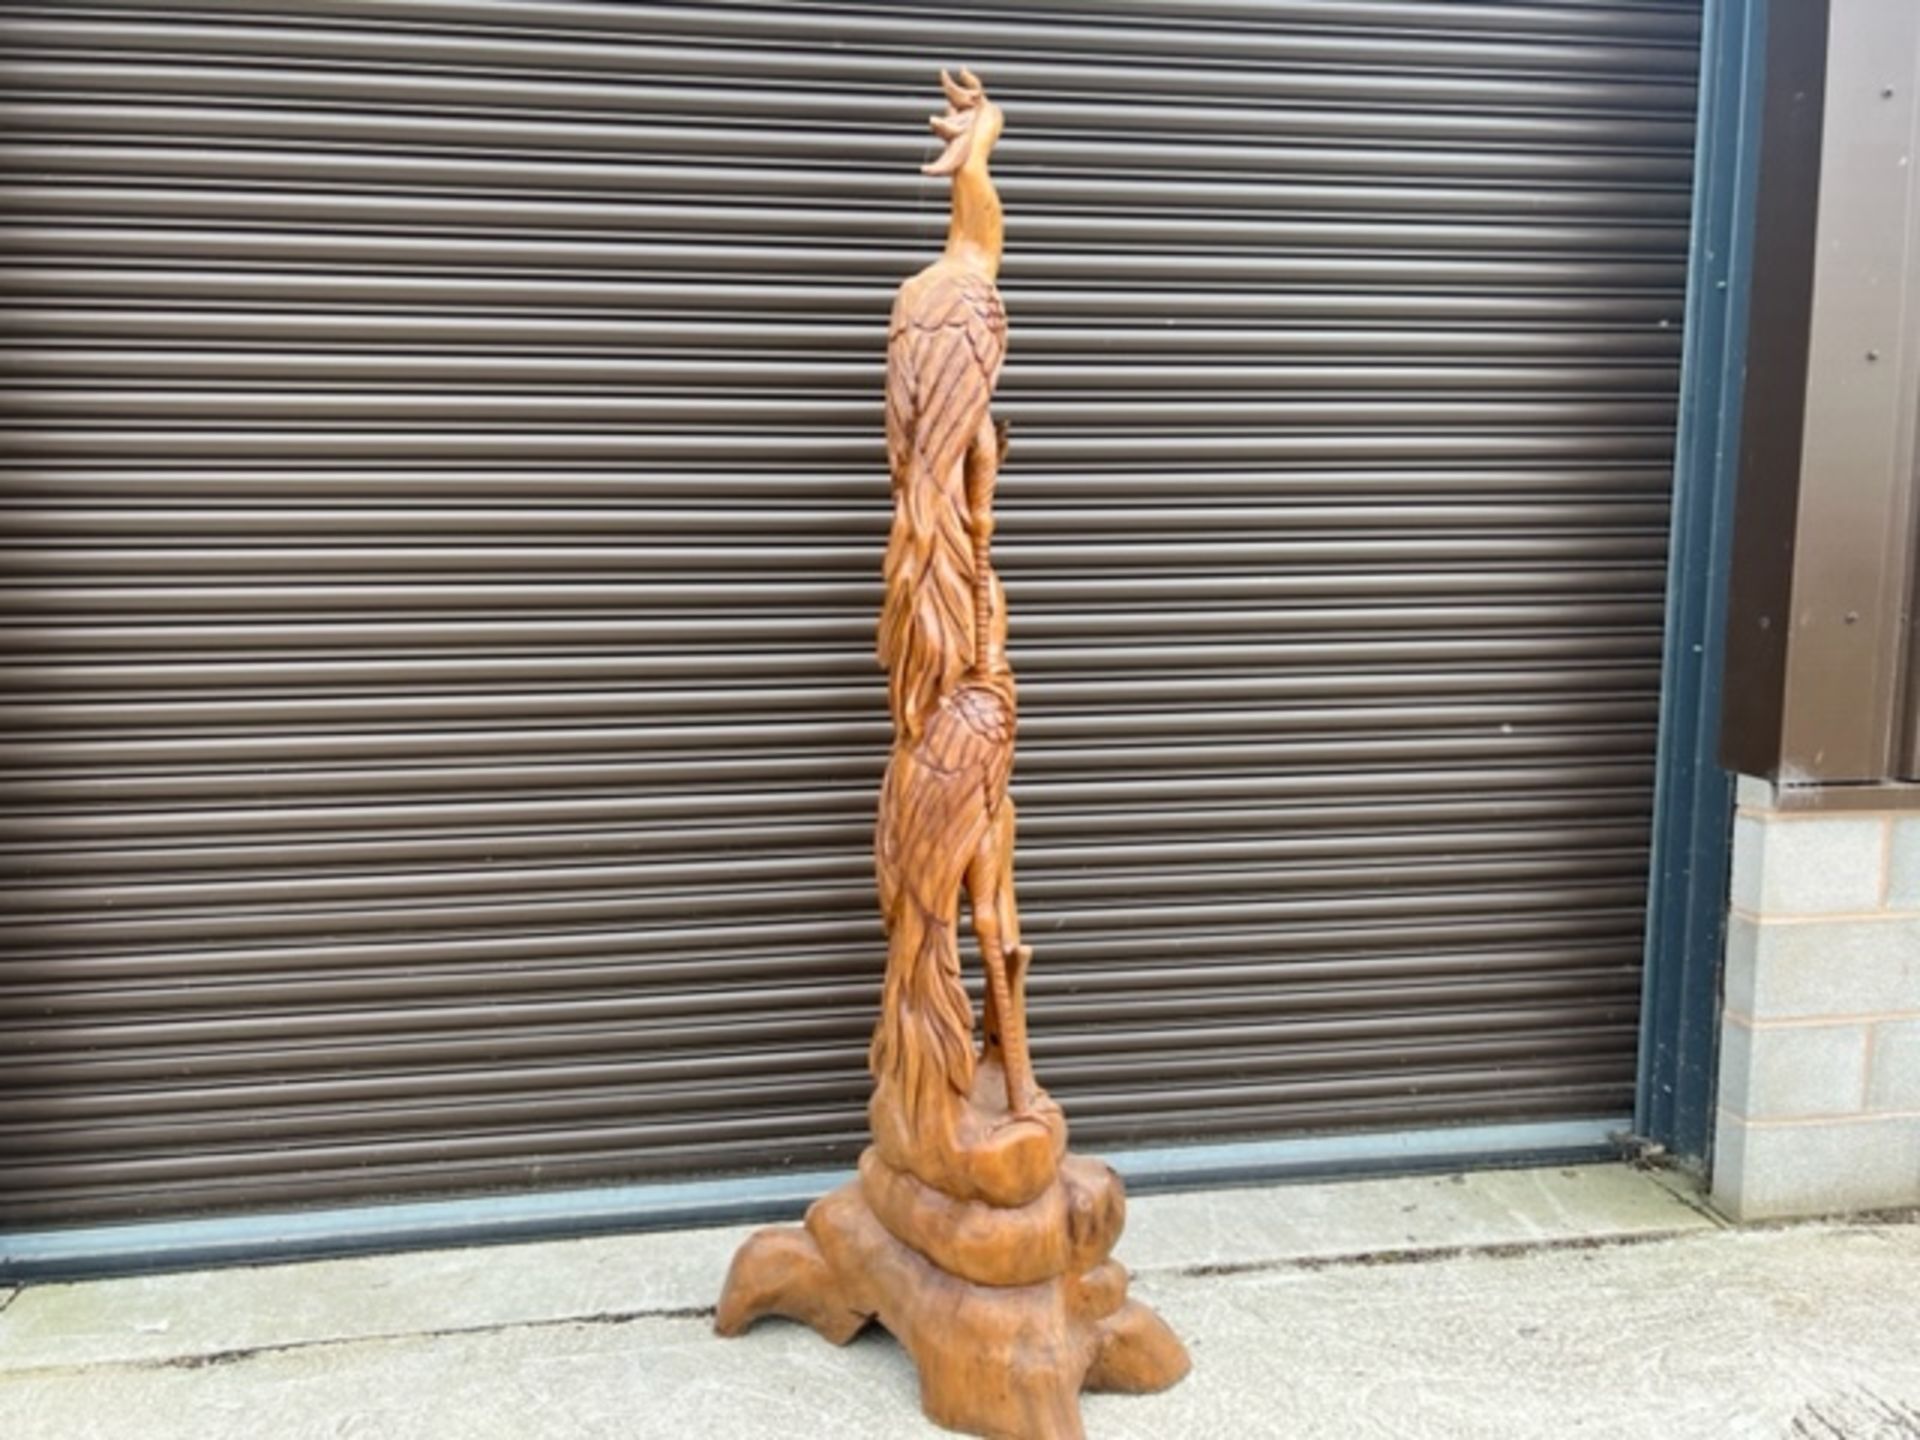 7Ft Tall Wooden Carving Depicting Birds Feeding - Image 3 of 5